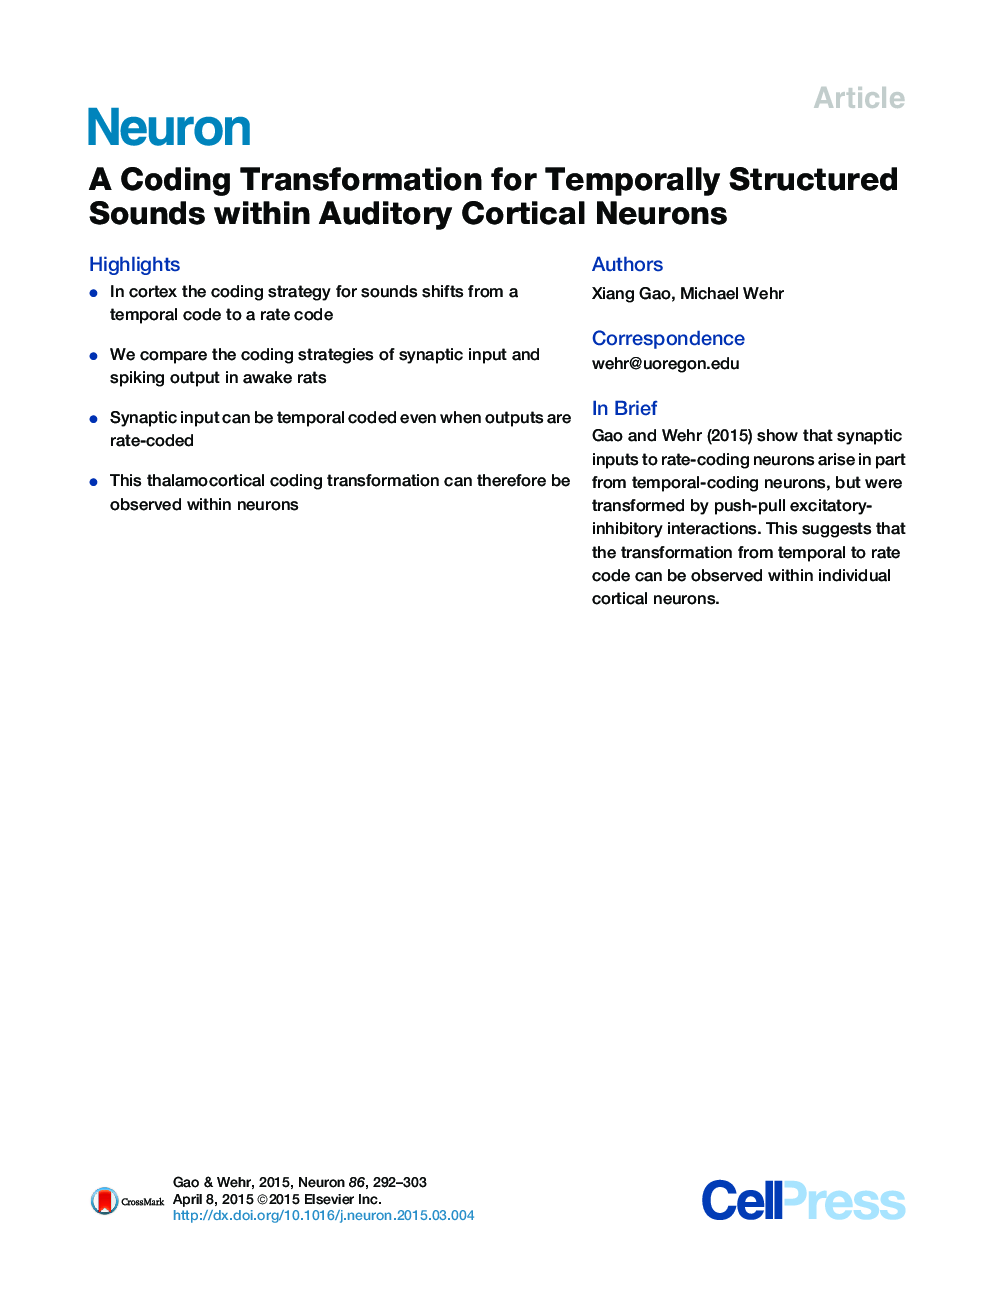 A Coding Transformation for Temporally Structured Sounds within Auditory Cortical Neurons